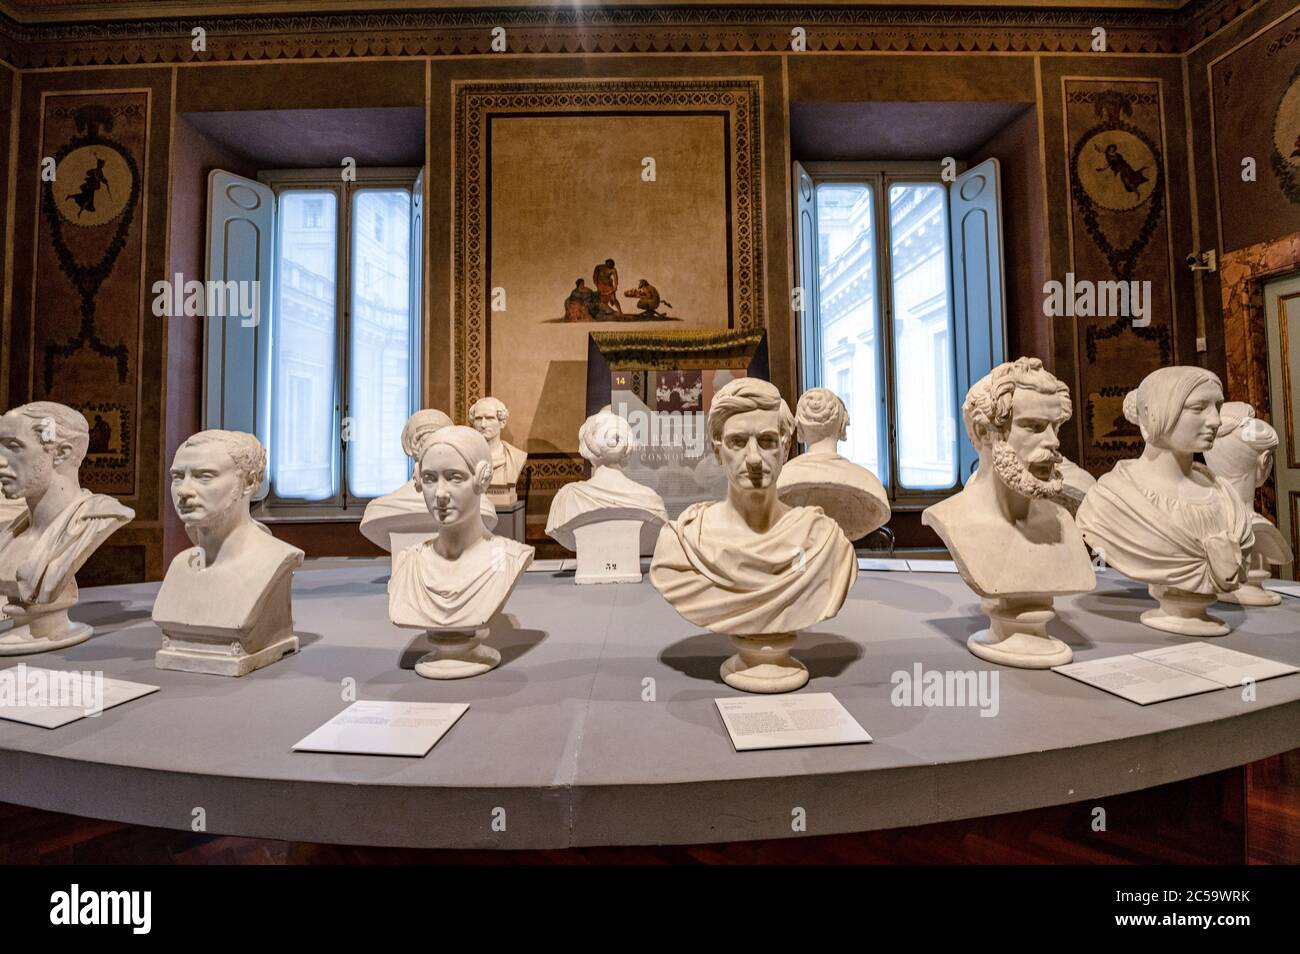 Italy Lazio Gallery of busts of personalities of the time carved in plaster by Pietro Tenerani, in the 2th floor of Palazzo Braschi in Rome Stock Photo